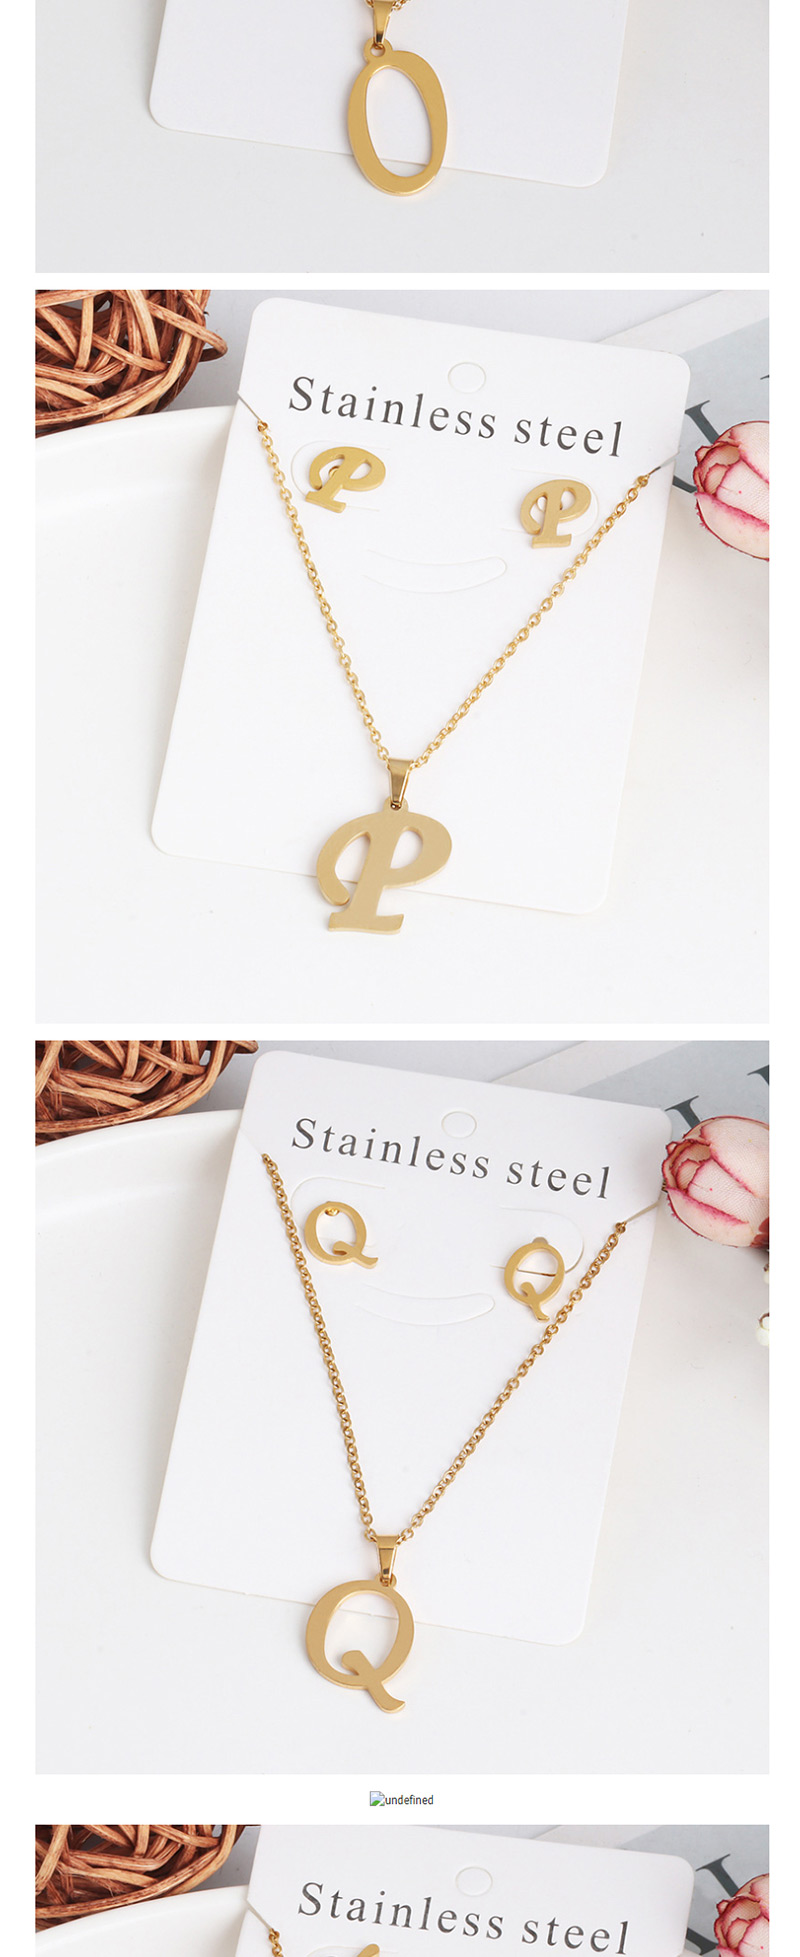 Fashion O Gold Stainless Steel Letter Necklace Earrings Two-piece,Jewelry Sets